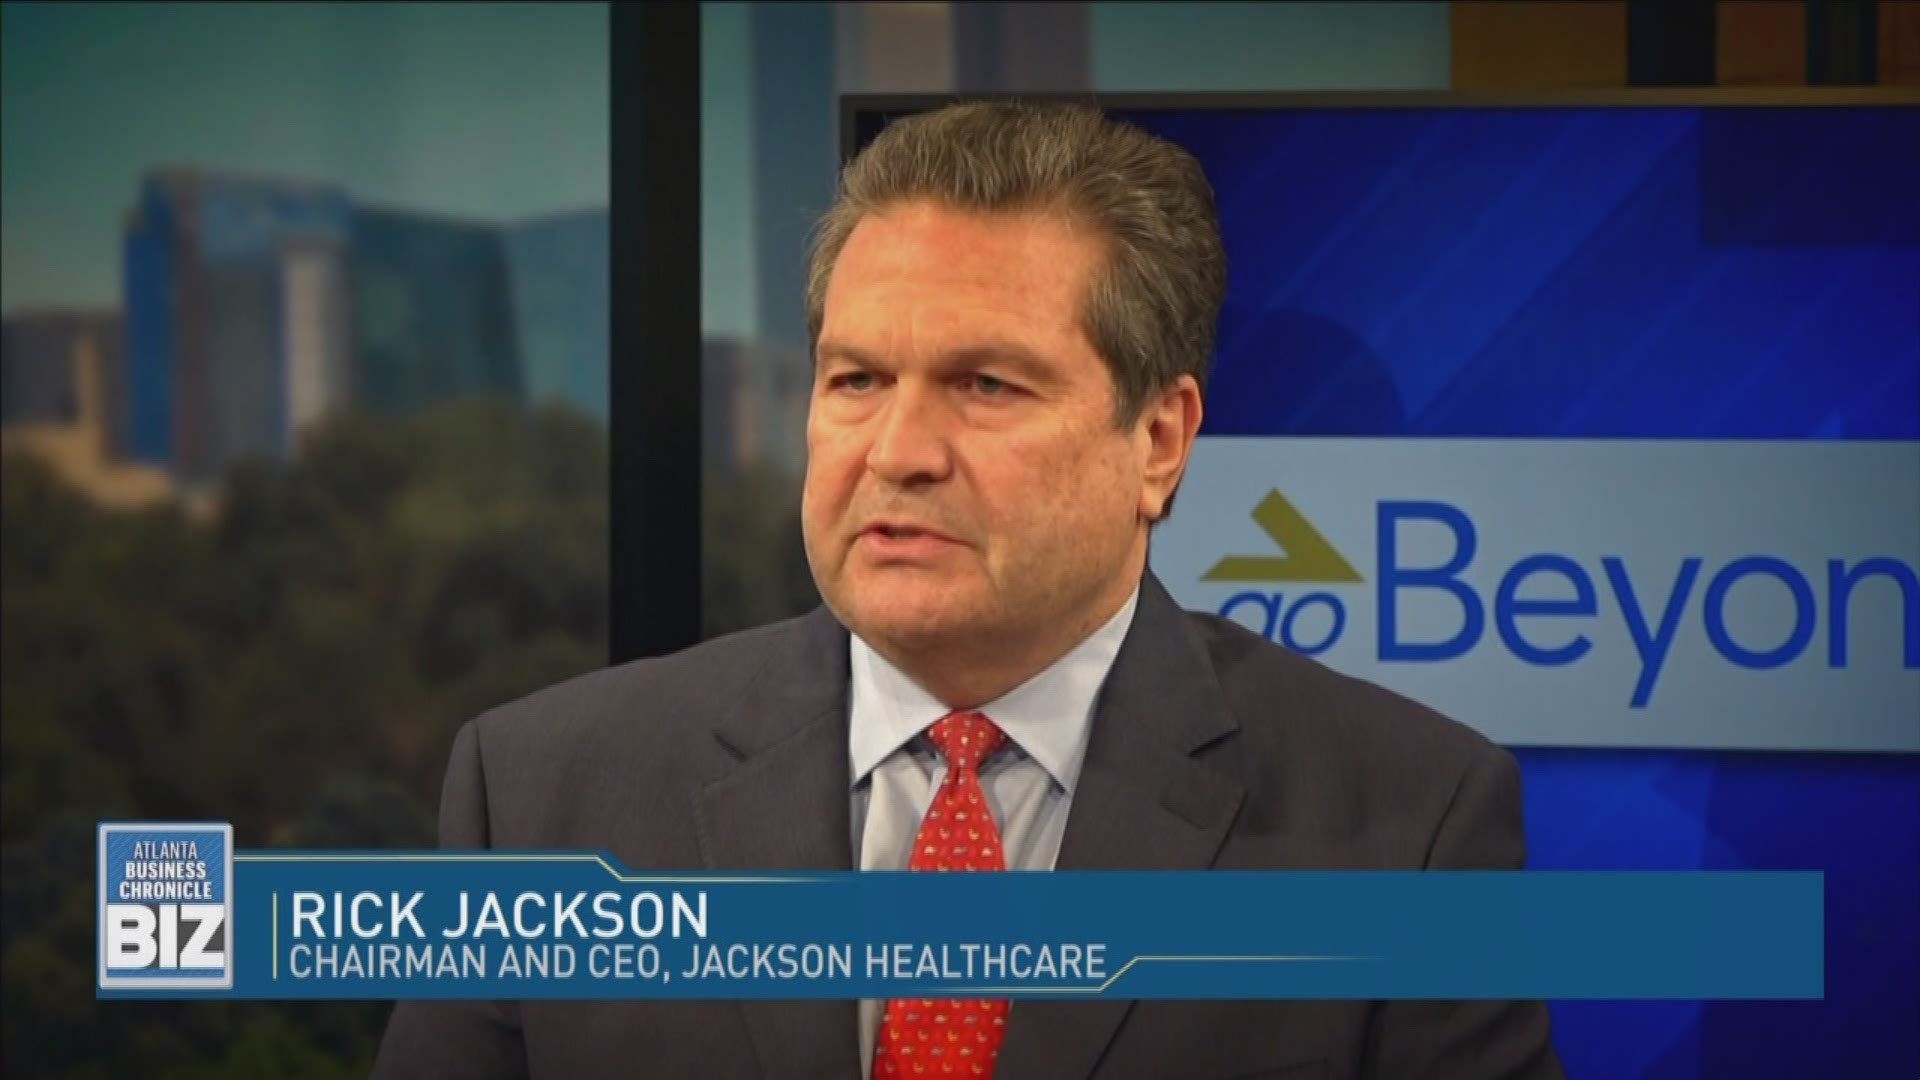 Jackson Healthcare's Rick Jackson talks about his incredible journey from foster care to CEO... and positive impact on Georgia through Go Beyond Profit on 'Atlanta Business Chronicle's BIZ'